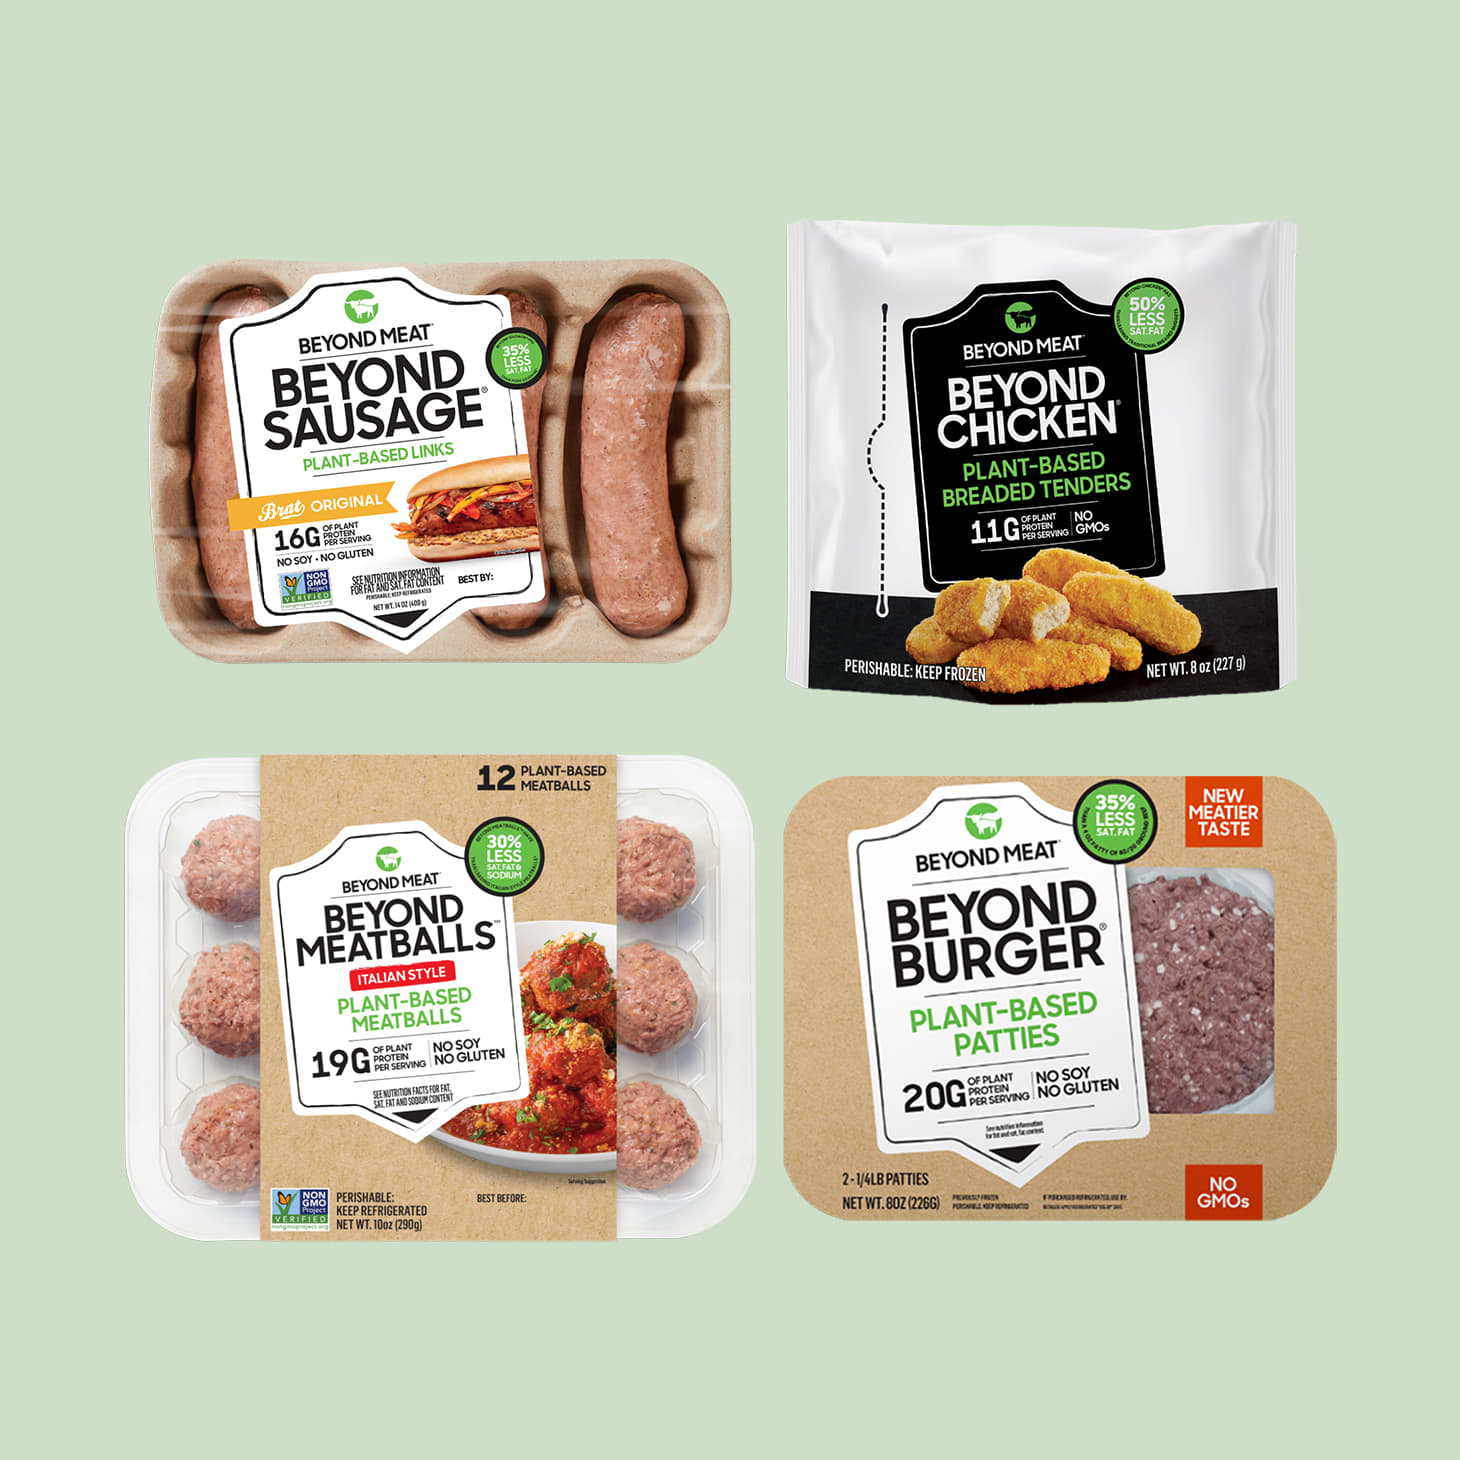 50 Plant Based Grocery Brands To Try in 2022